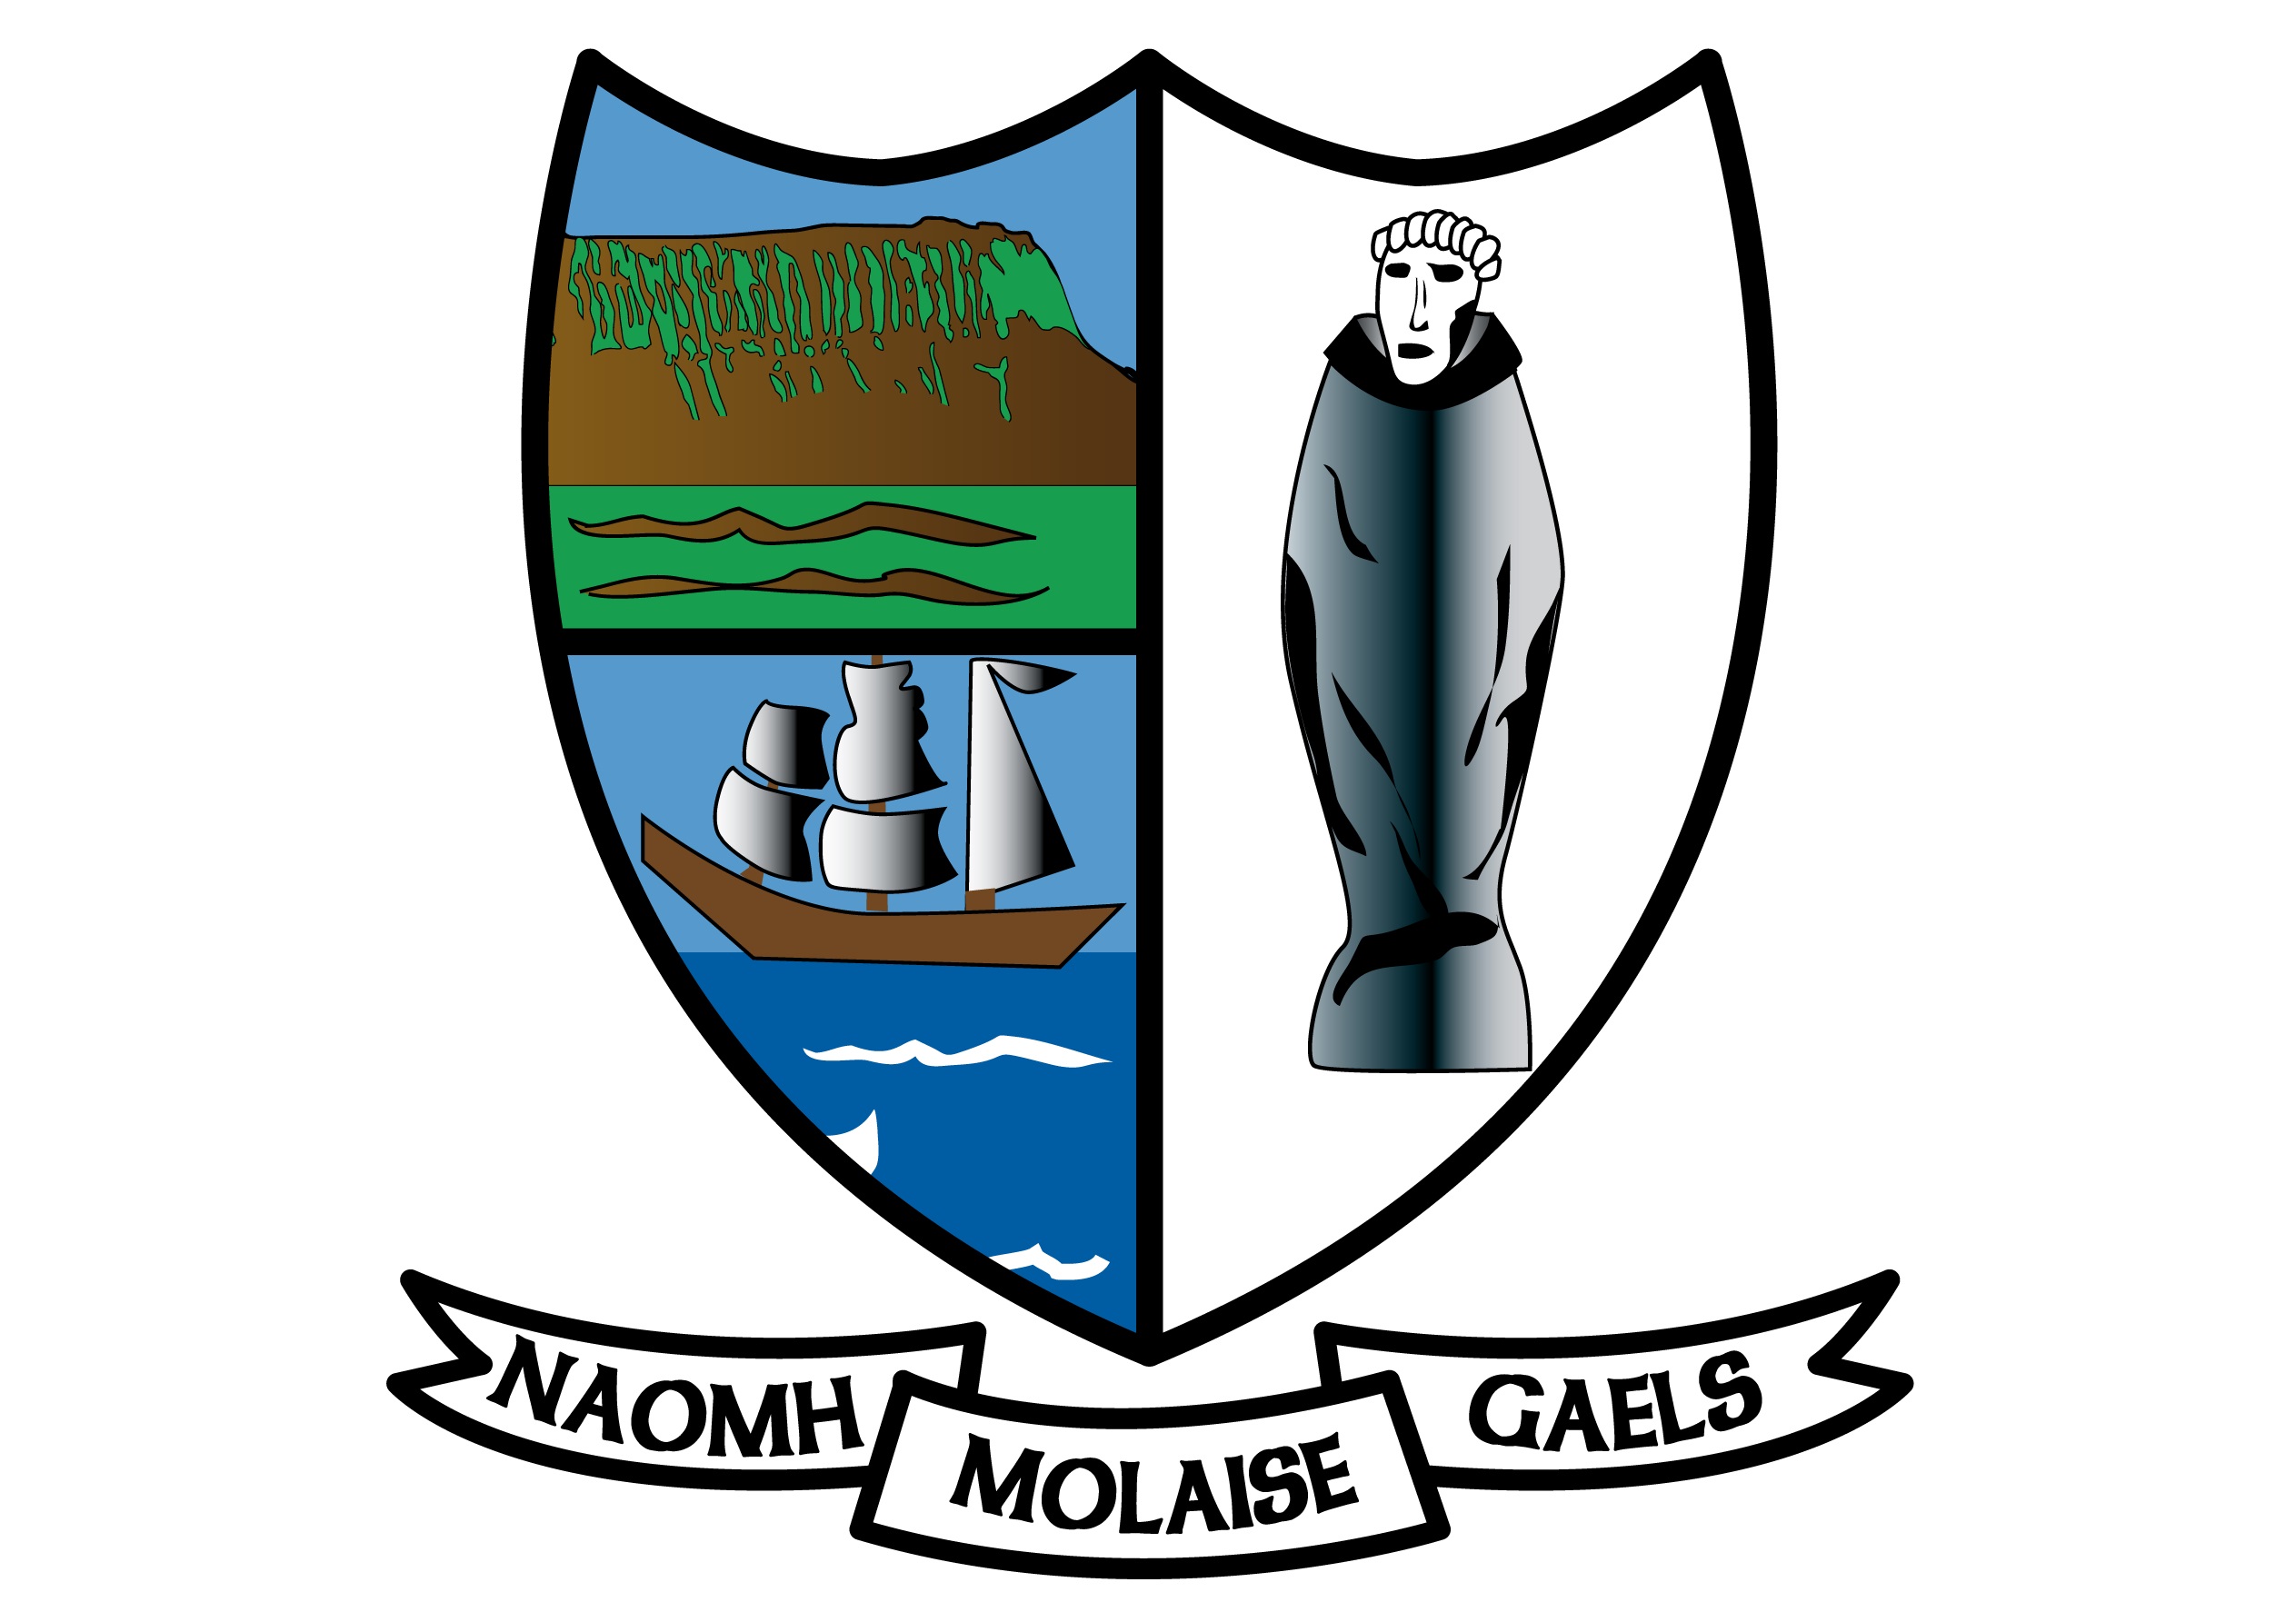 St Molaise Gaels club notes 20 June 2022